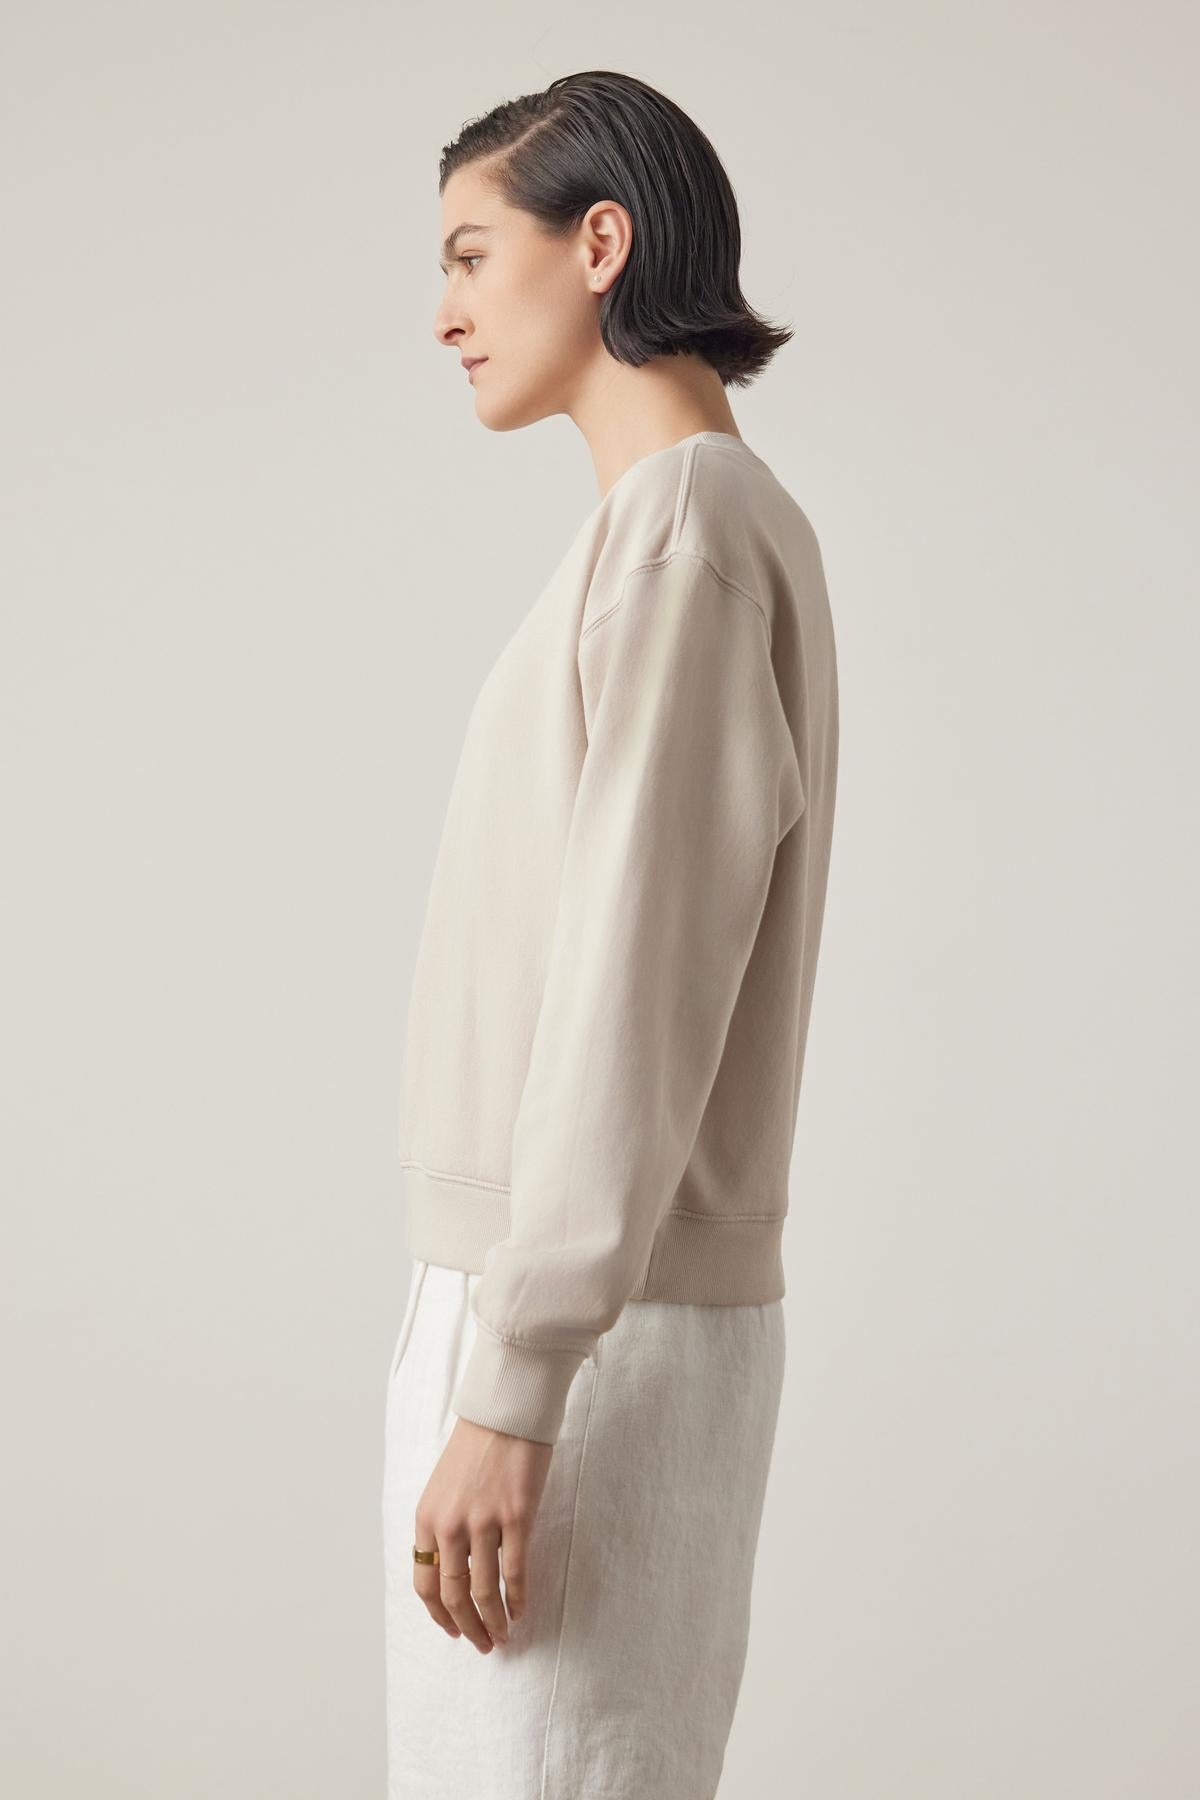 Profile view of a person with slicked-back hair wearing a beige YNEZ SWEATSHIRT by Velvet by Jenny Graham and white pants against a light background.-36863307677889